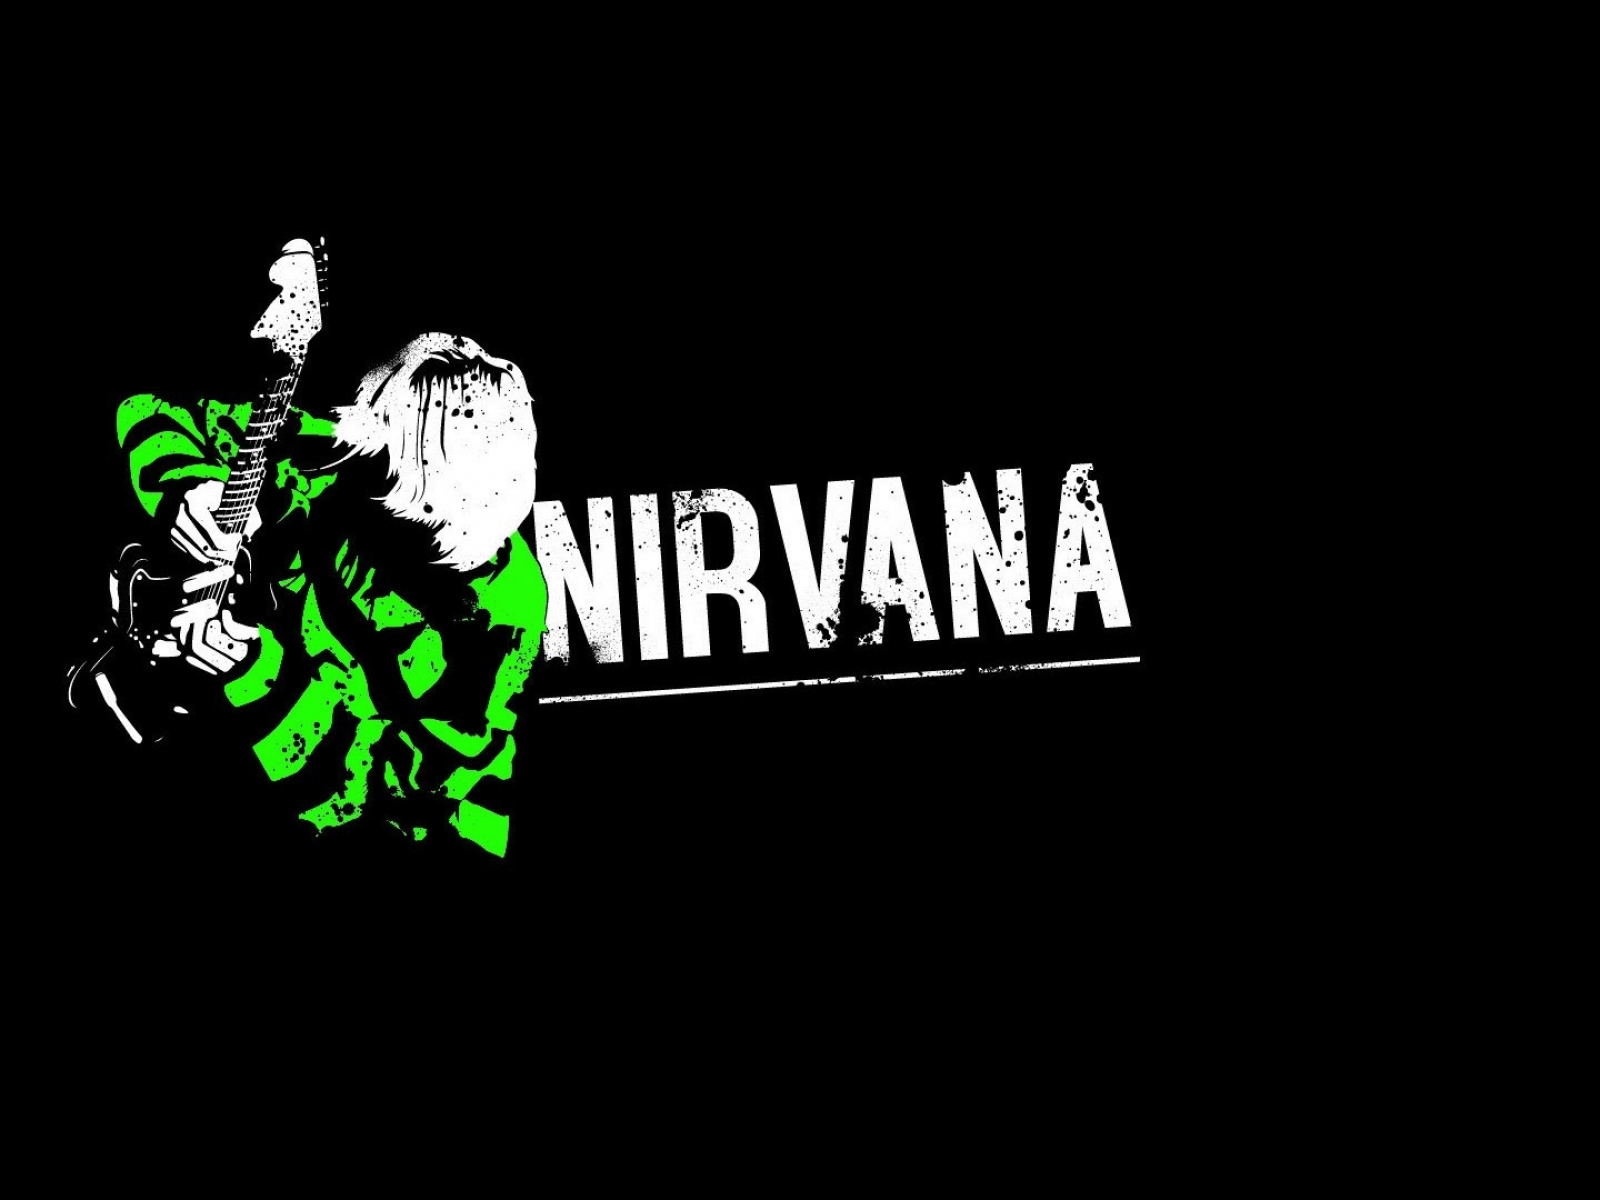  music bands black background 1920x1080 wallpaper People HD Wallpaper